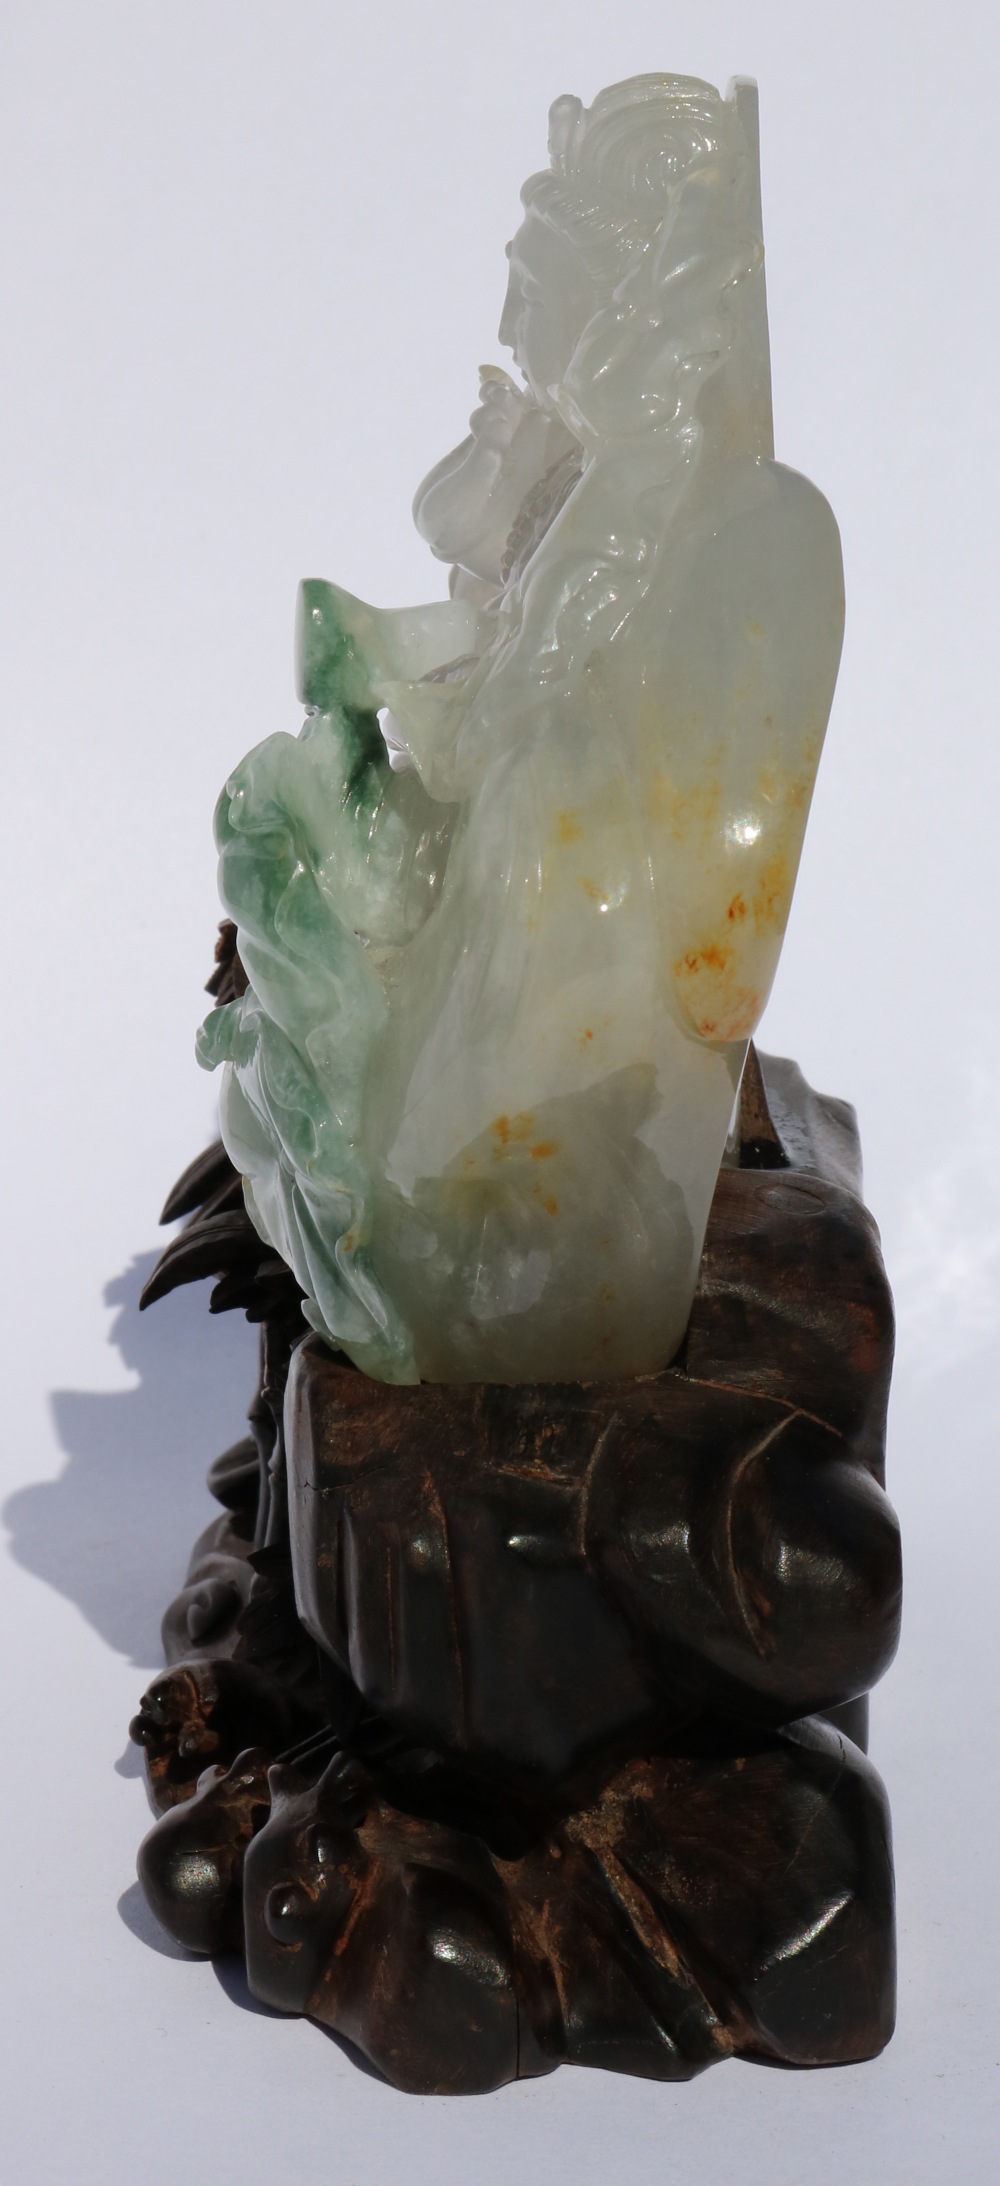 Chinese jadeite figural carving, featuring Guanyin seated in royal ease, holding a jewel and lotus - Image 2 of 4